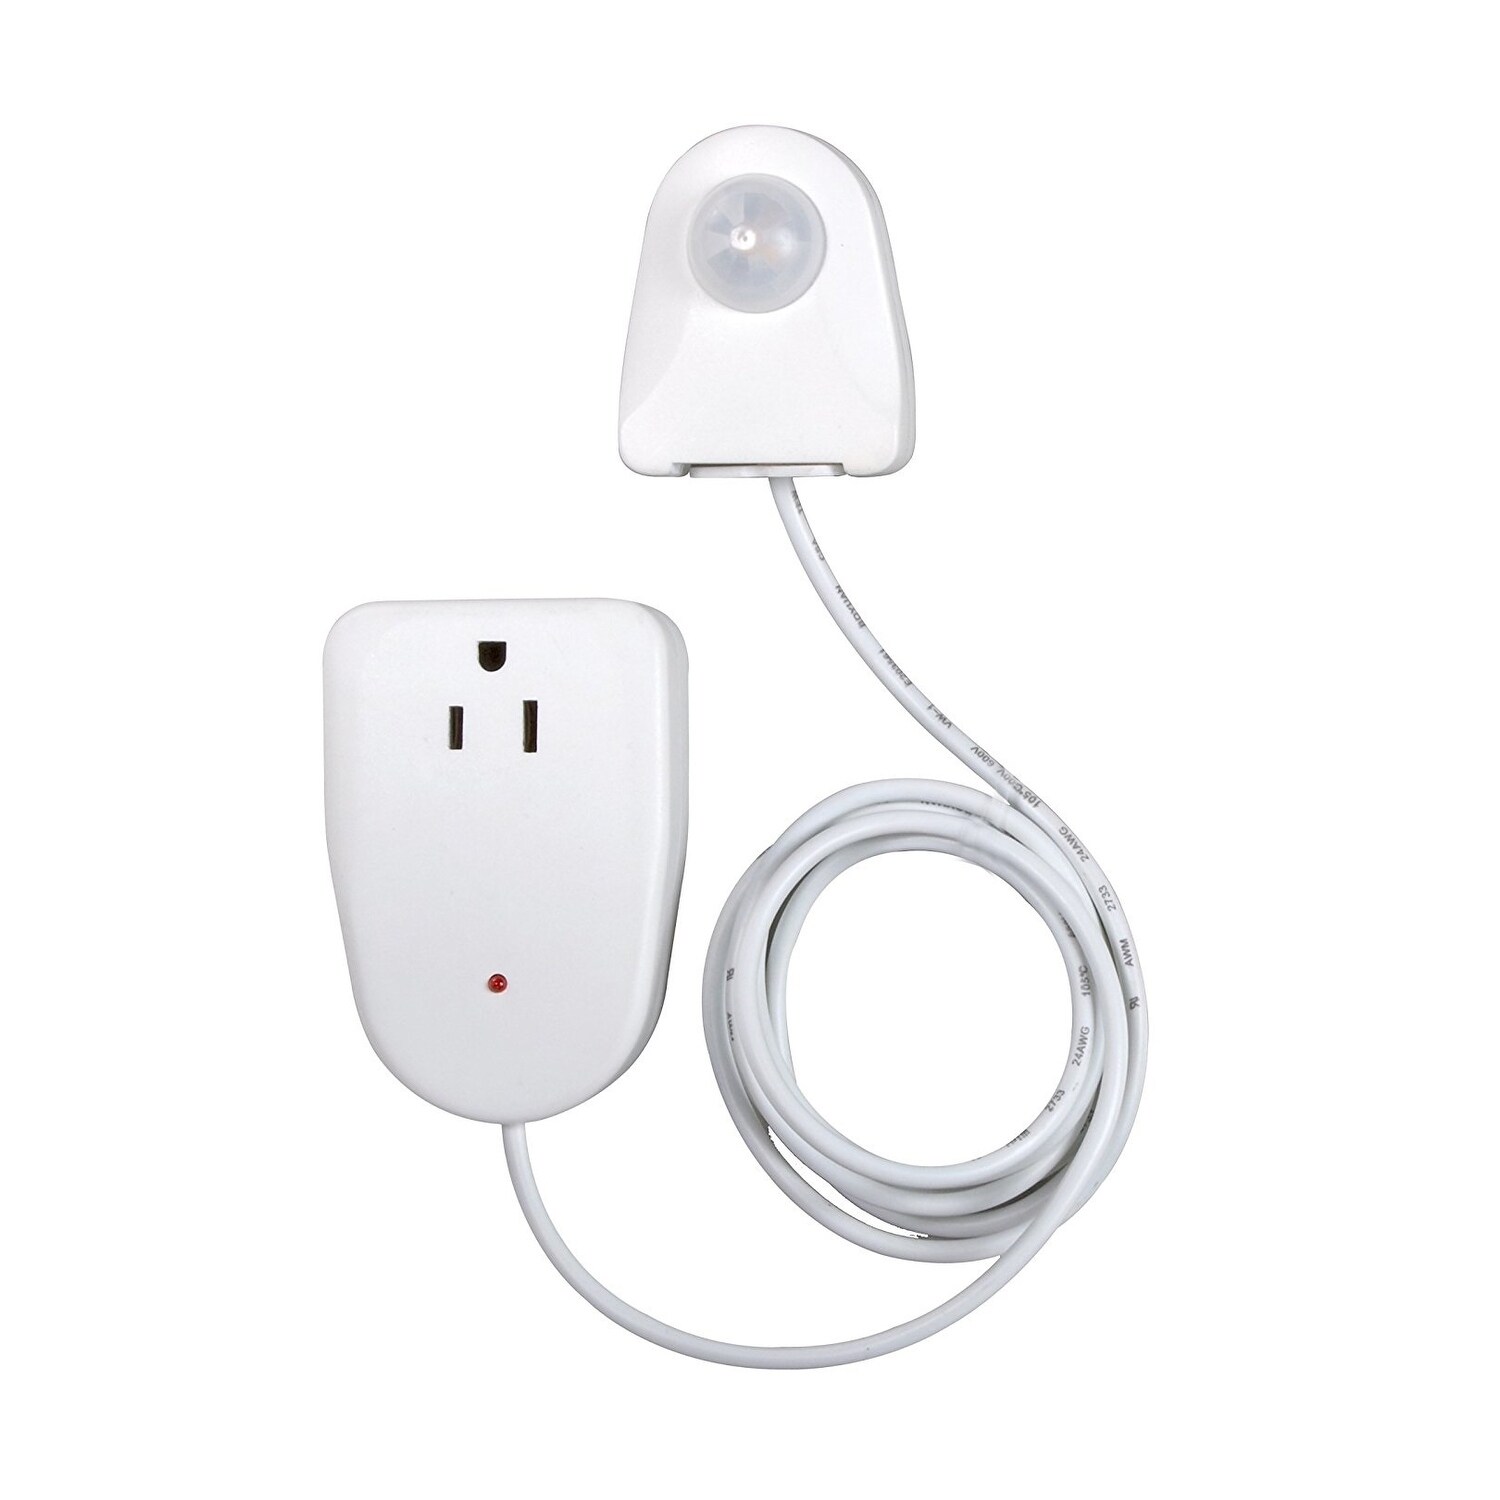 https://ak1.ostkcdn.com/images/products/is/images/direct/76a0f05072d1ff1b24f98d3e75e615049df7a83b/Amertac-MLC12BC-4-Indoor-Plug-In-Corded-Motion-Activated-Light-Control.jpg